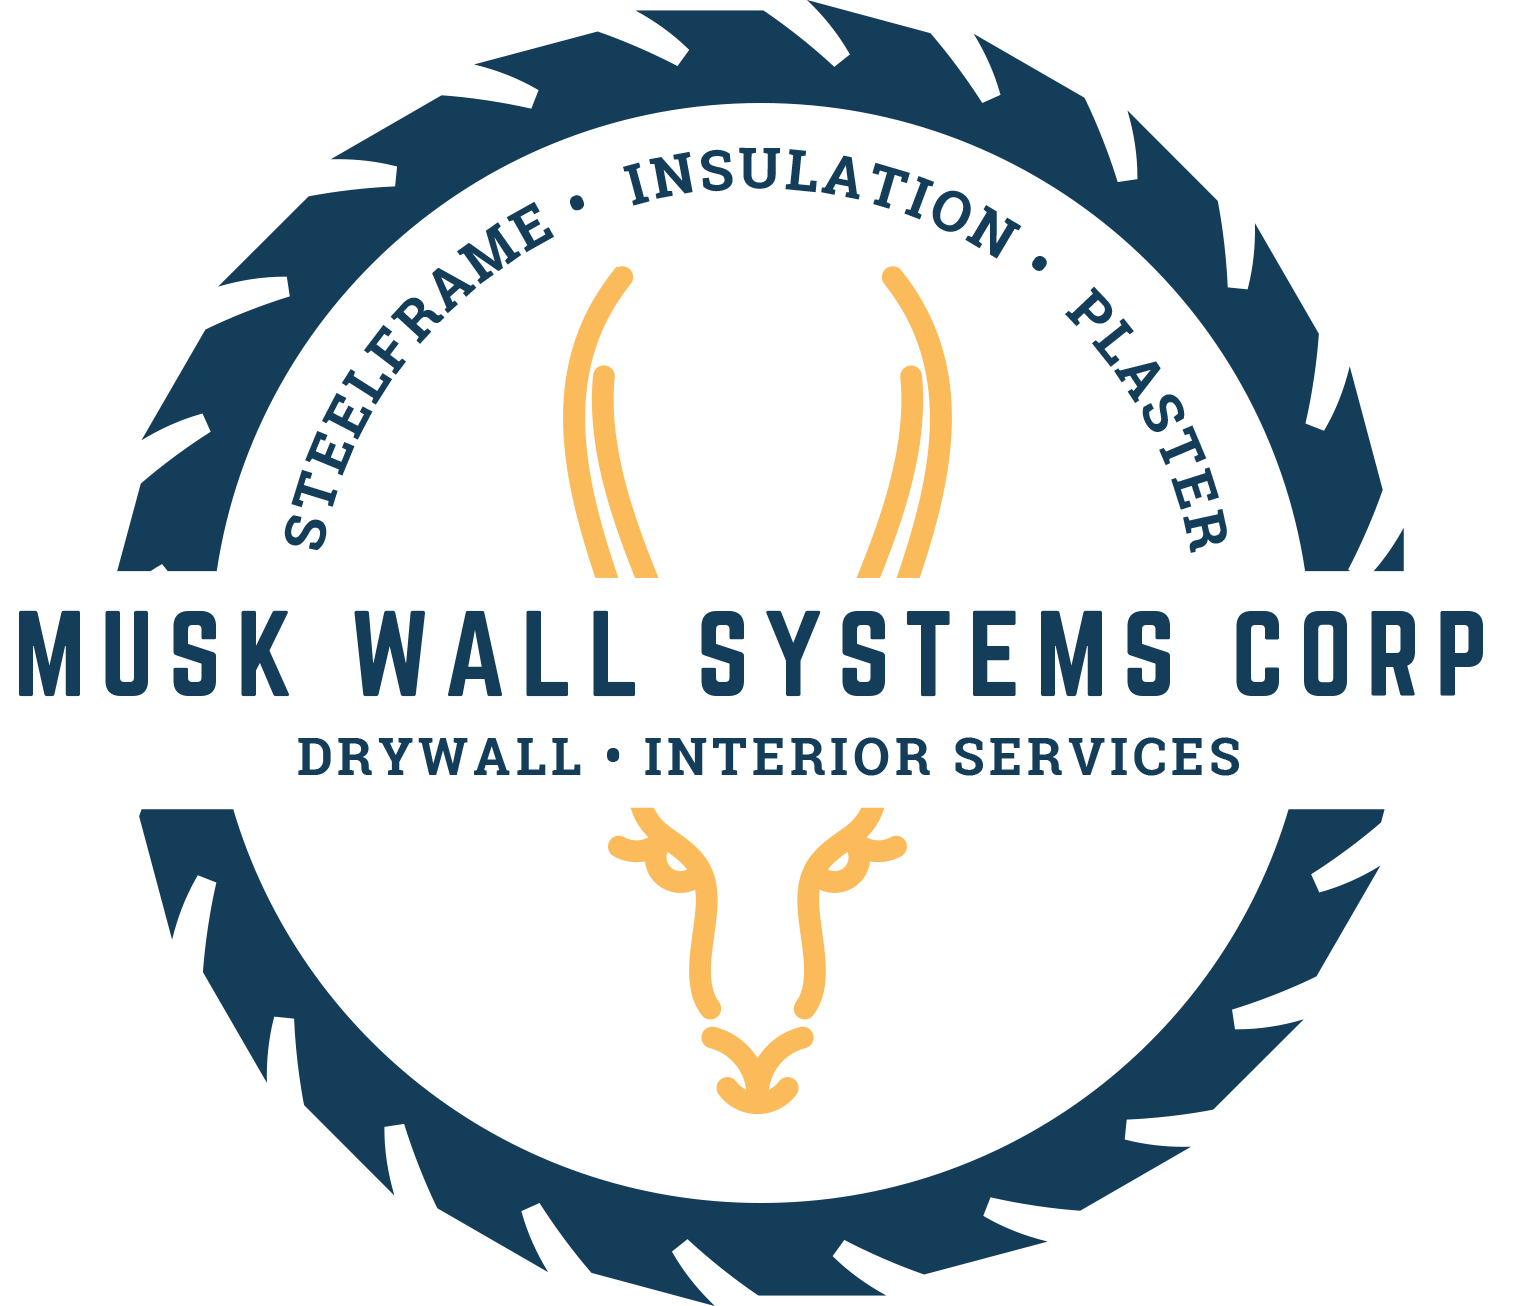 musk wall system corp